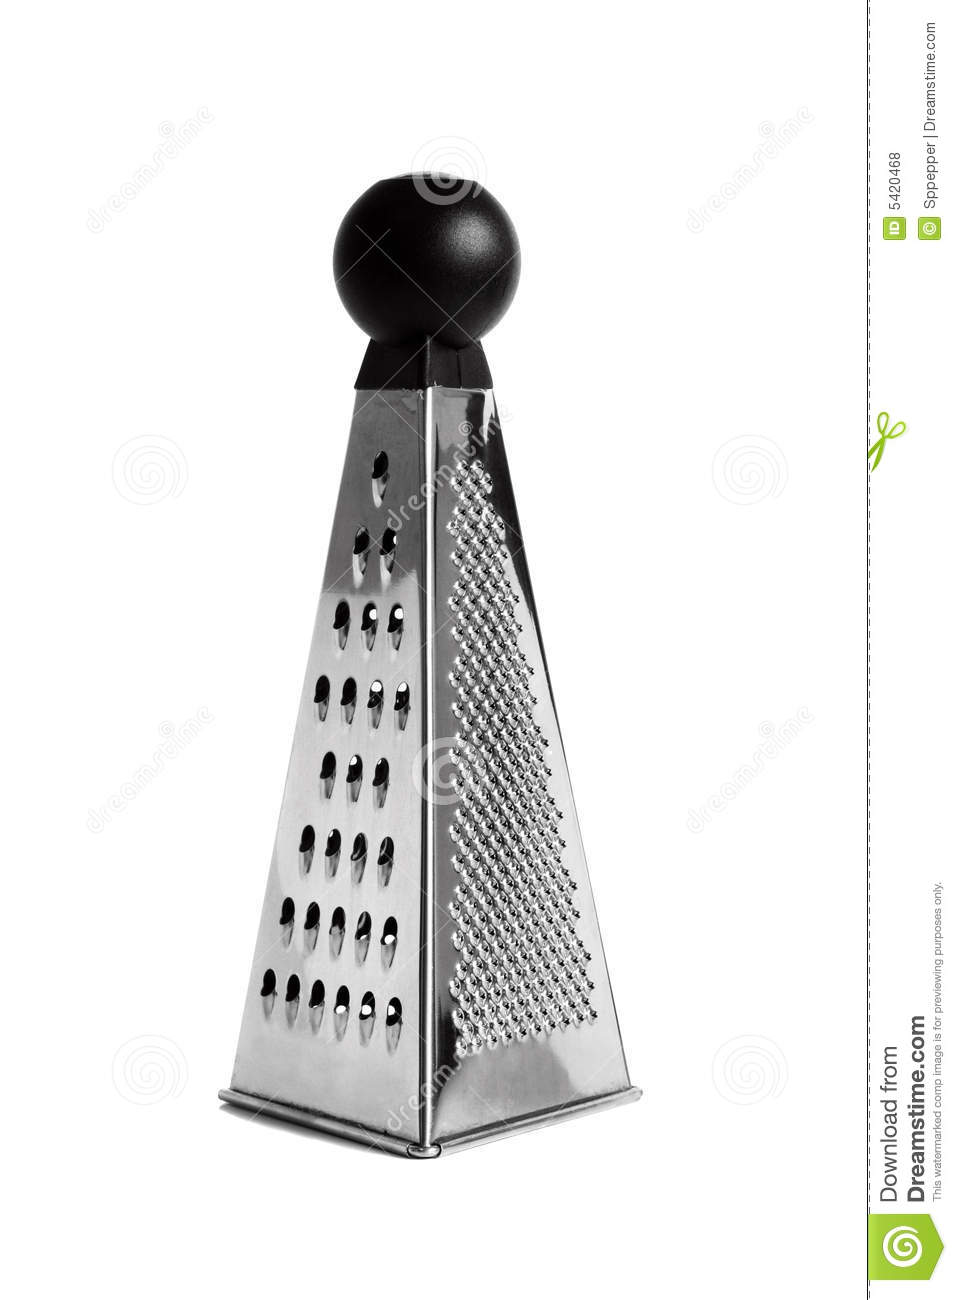 Cheese Grater Royalty Free Stock Photos   Image  5420468